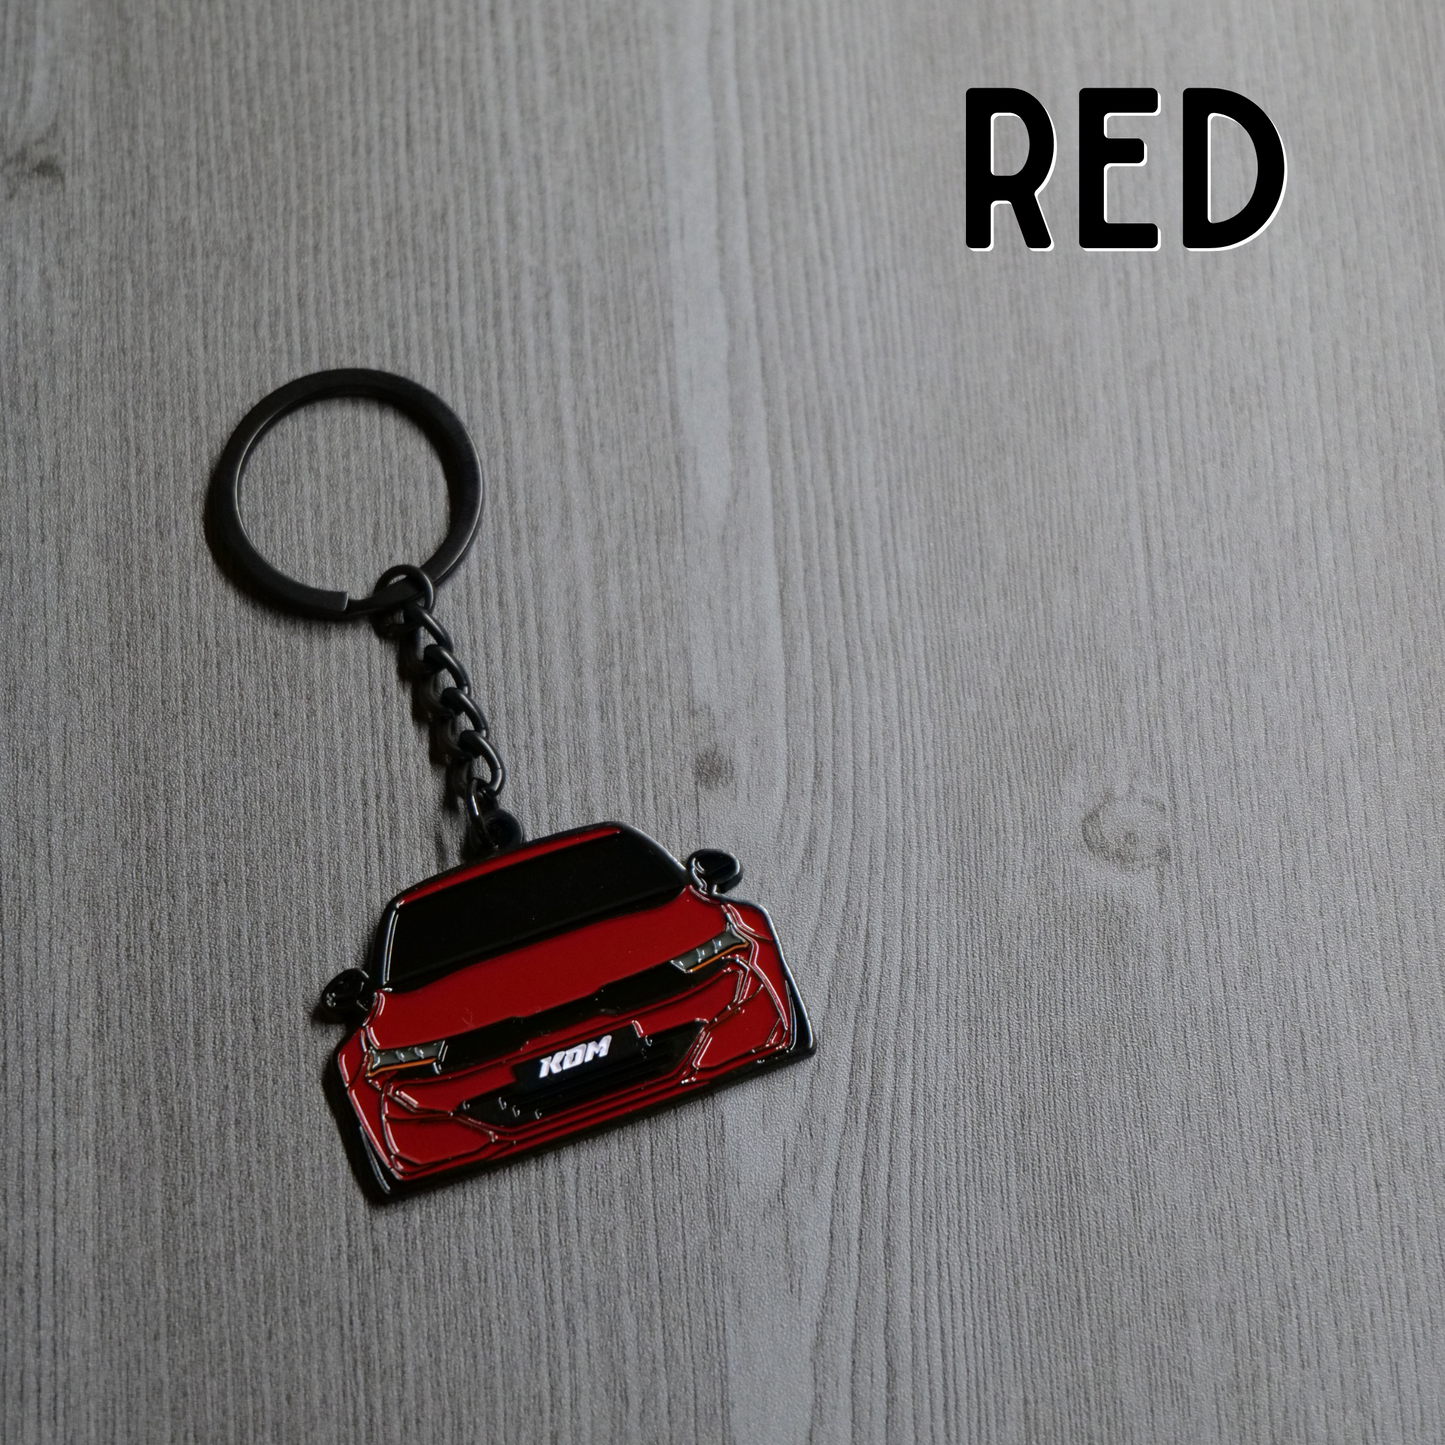 K5 Molded Keychain for Kia K5 Owners | Perfect Gift for Kia K5 Enthusiasts